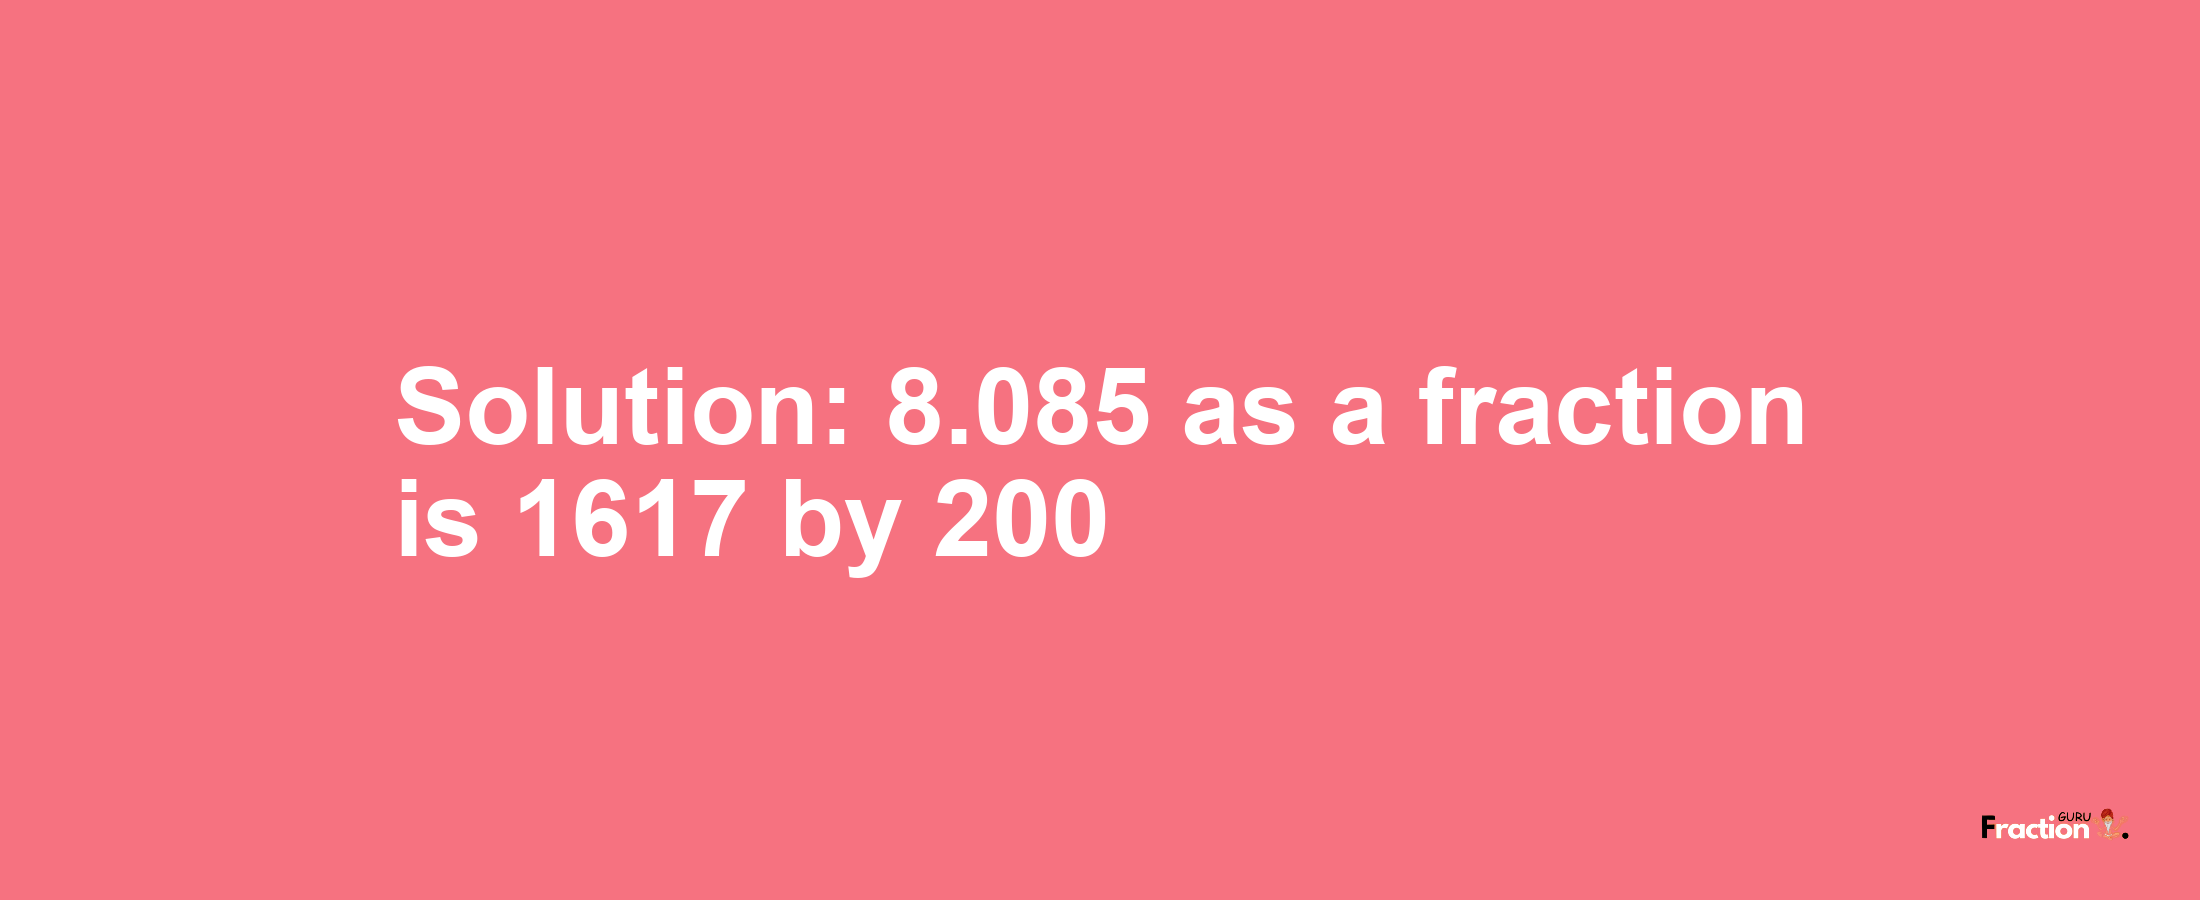 Solution:8.085 as a fraction is 1617/200